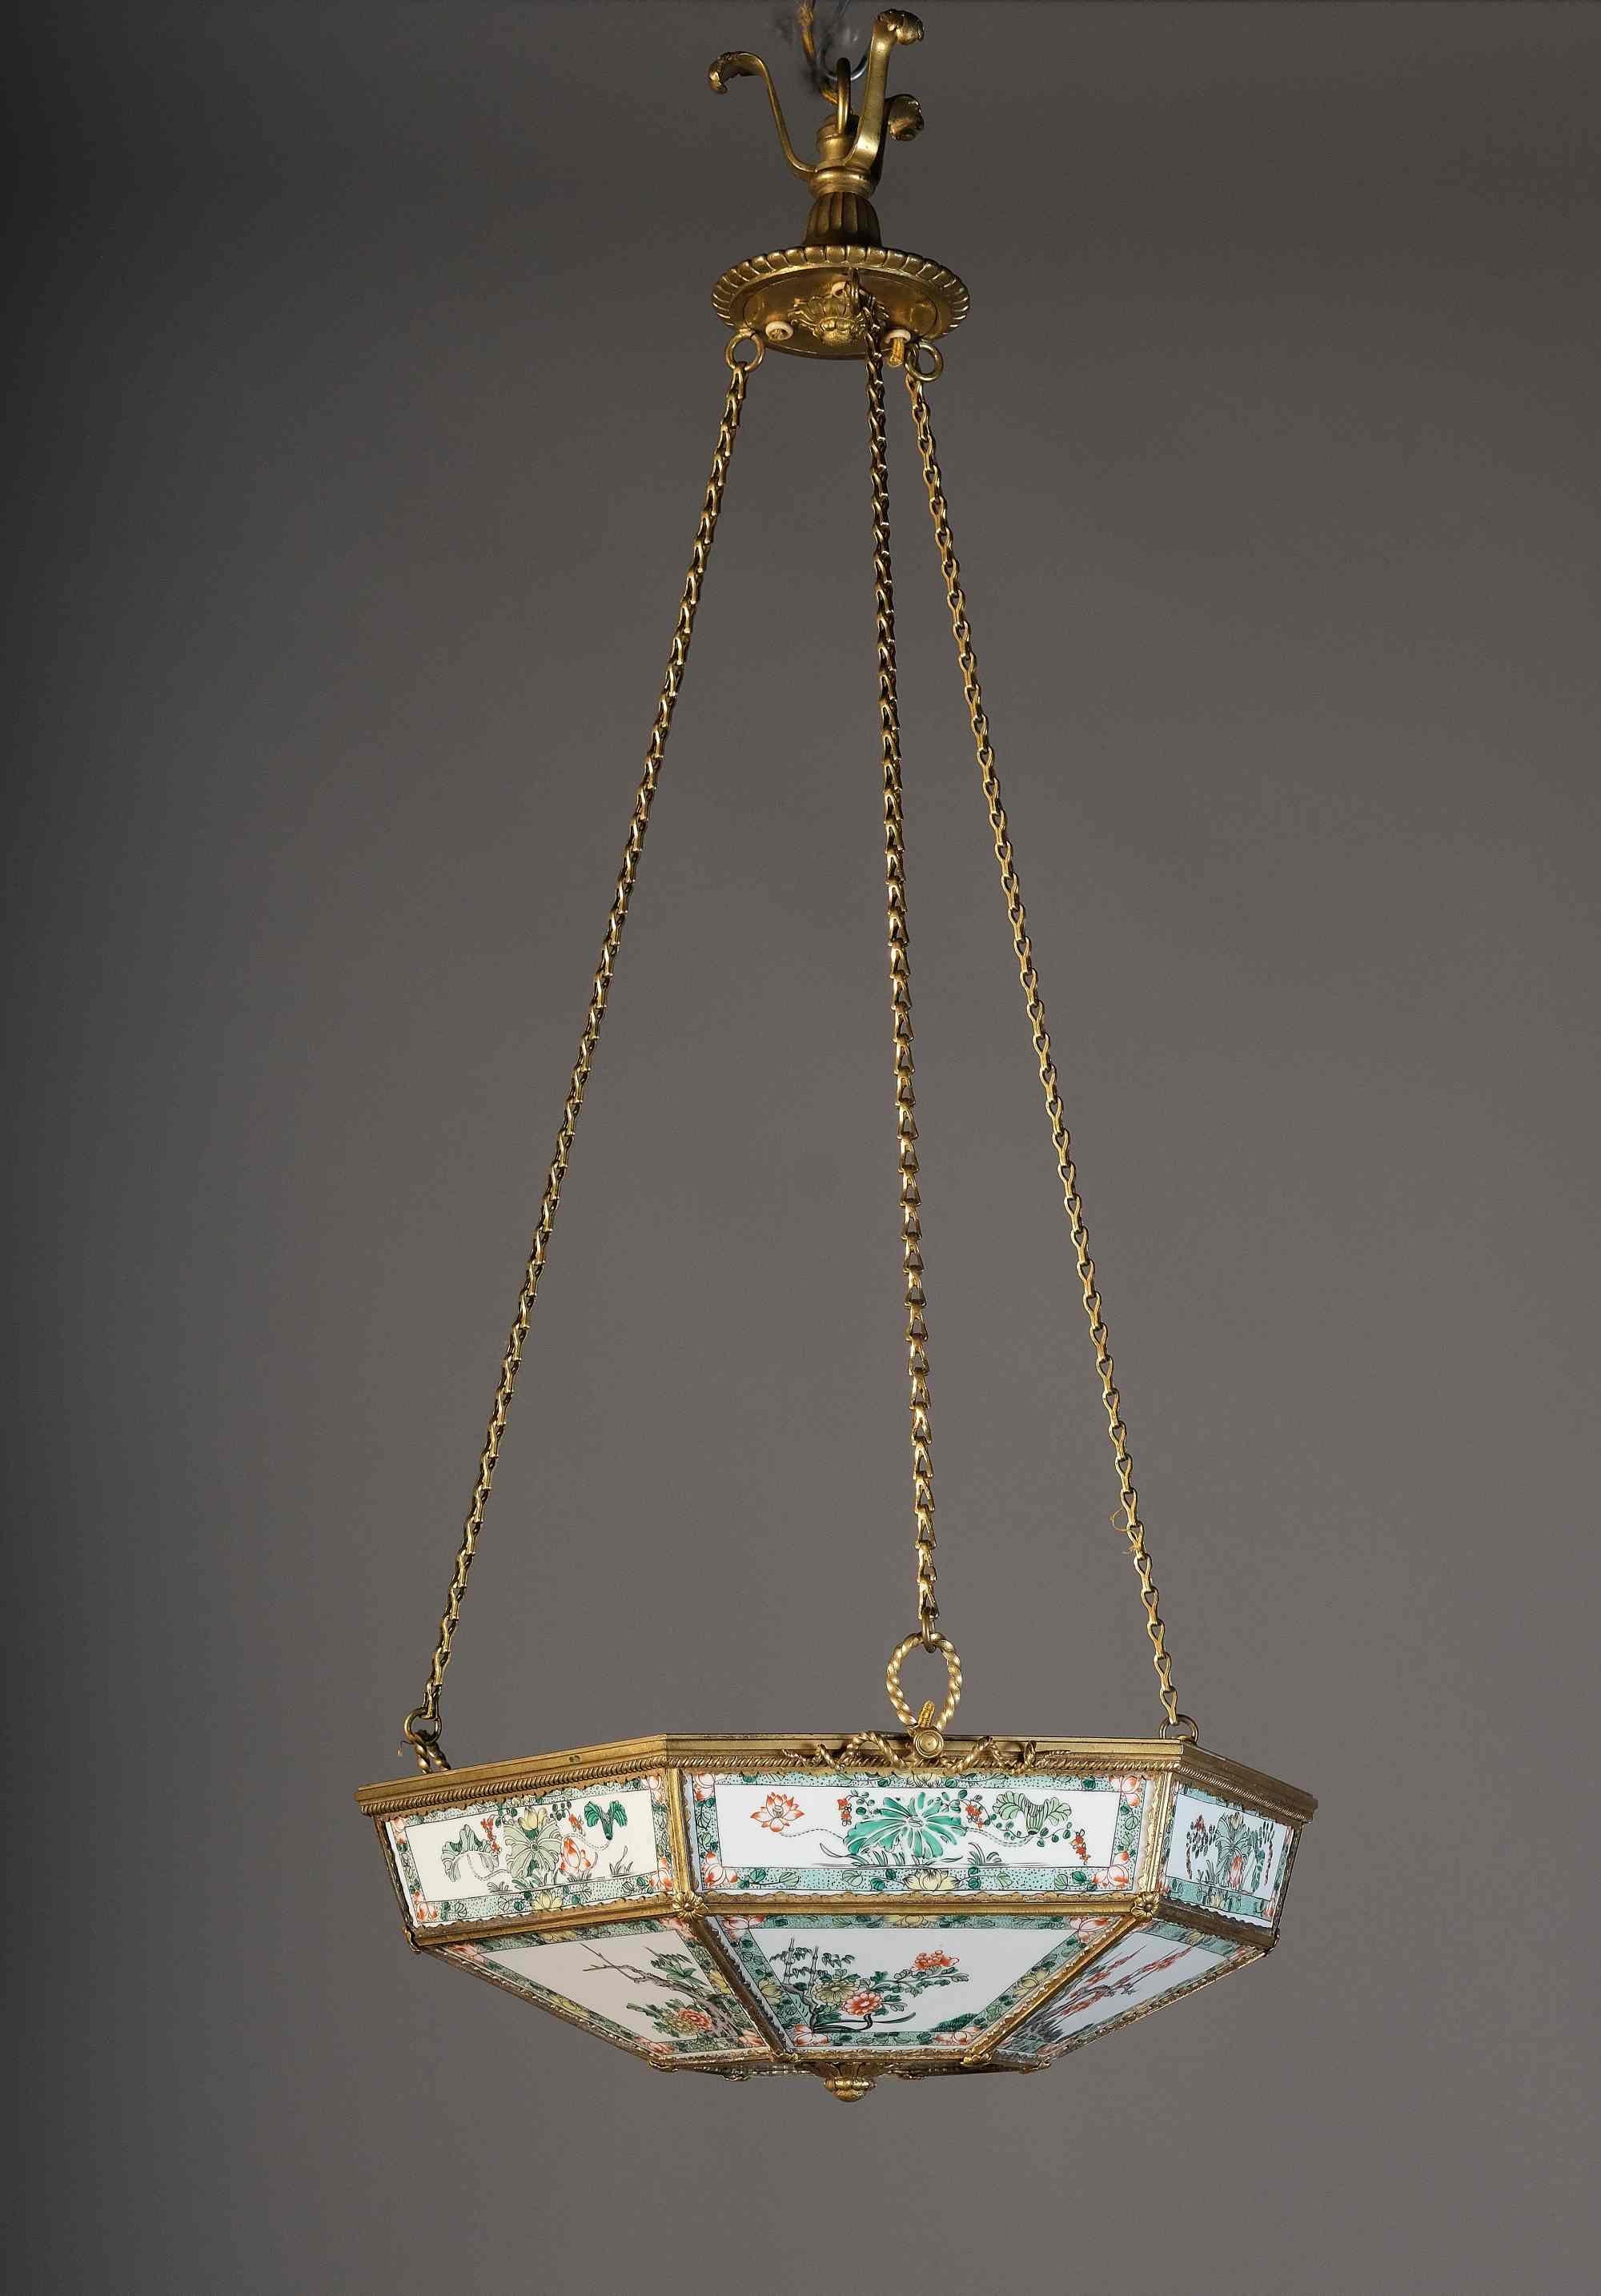 This extremely rare lamp consists of Kangxi porcelain panels with an Charles X gilt bronze frame. The classical Chinese panels are finely framed and are decorated on the inside with delicate floral and foliage compositions. The finely decorated